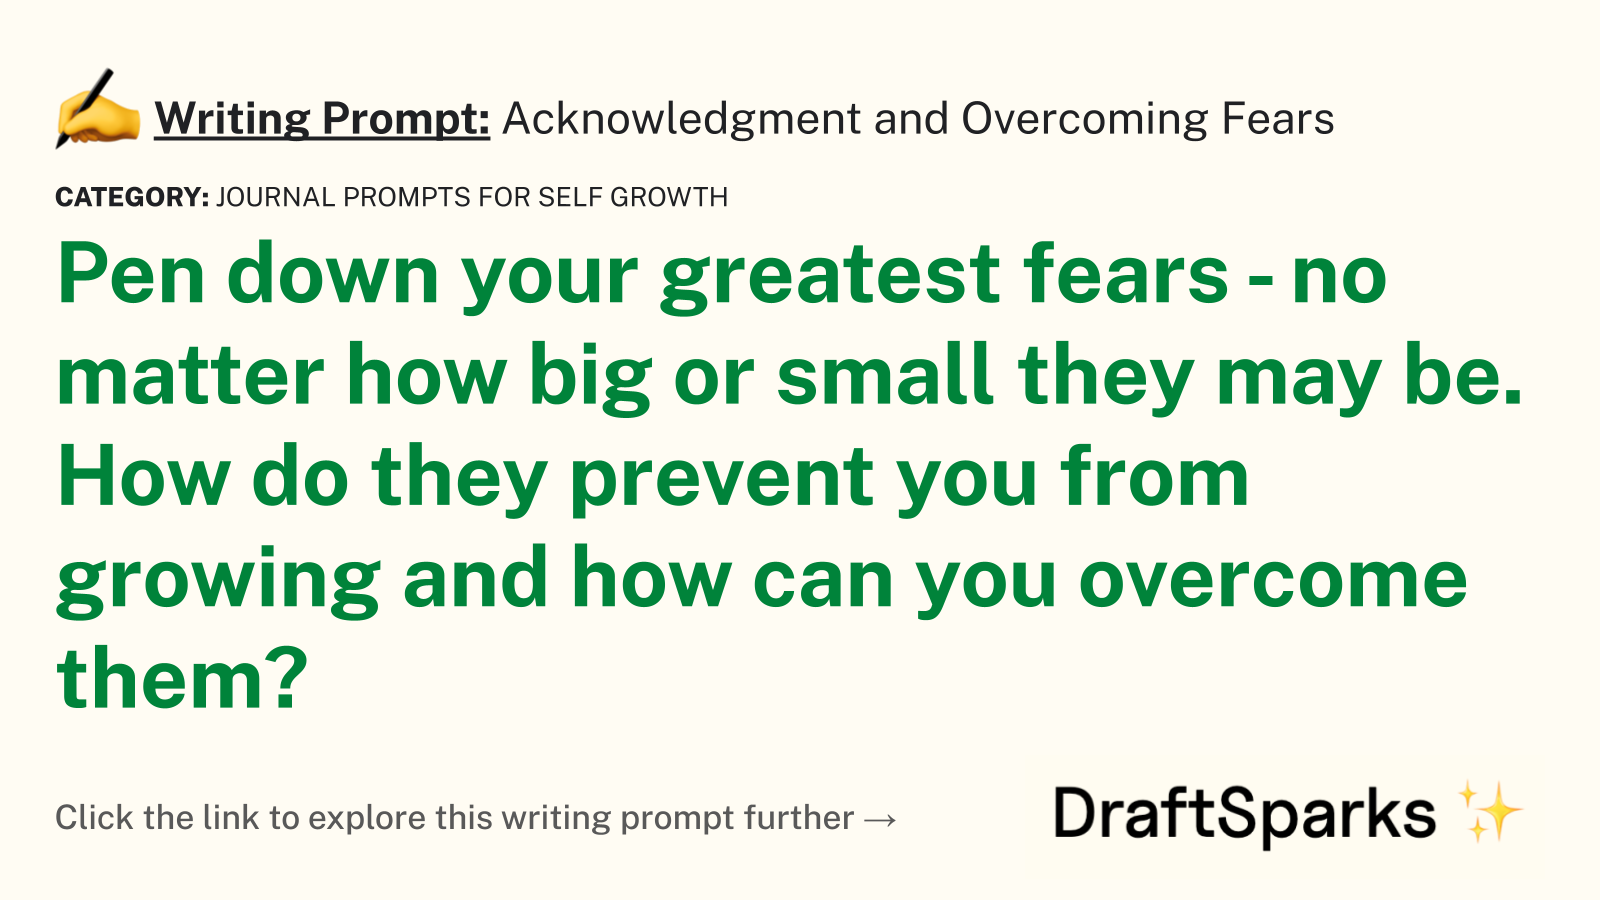 Acknowledgment and Overcoming Fears